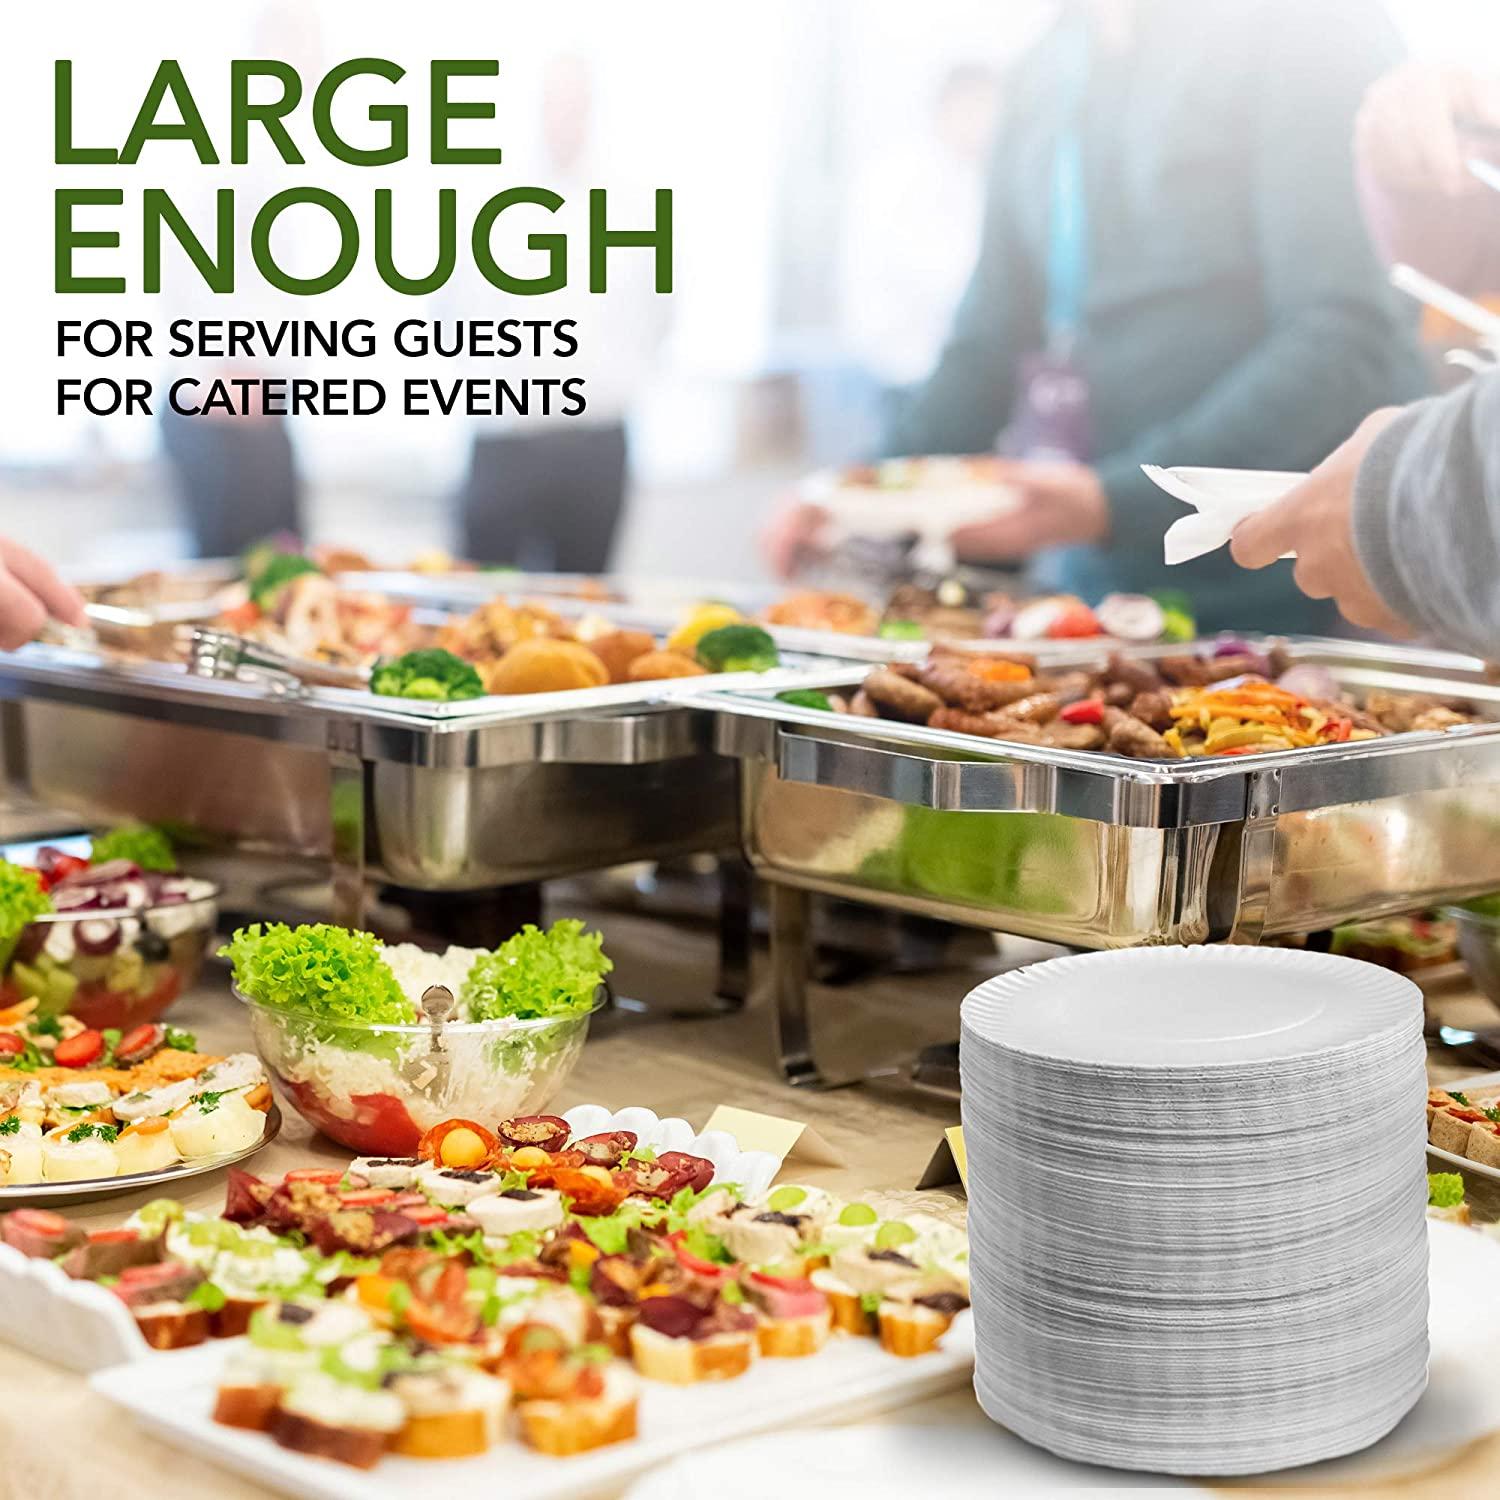 [300 Pack] Bulk Disposable White Uncoated Paper Plates 9 inch Large